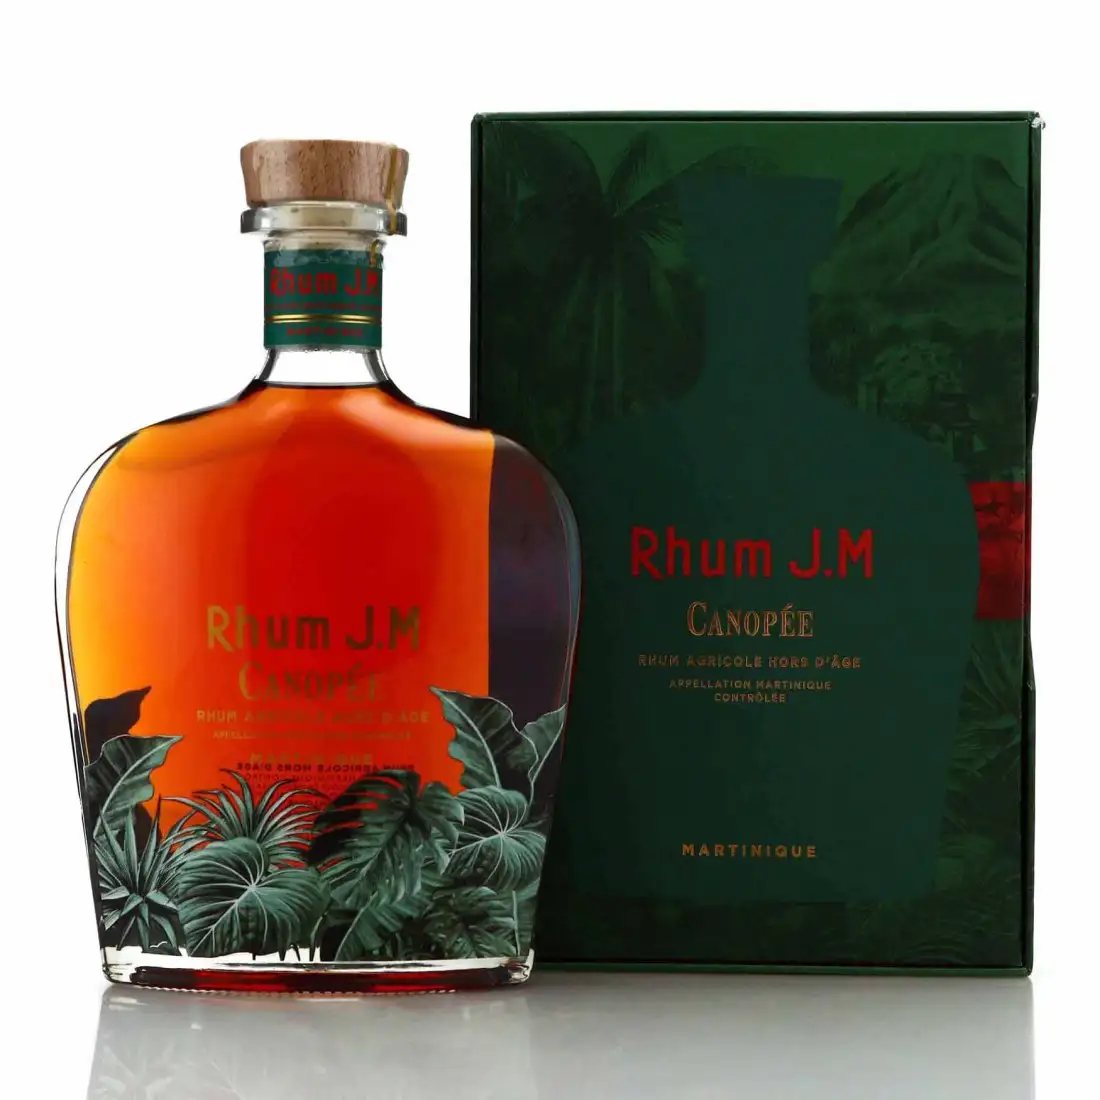 Image of the front of the bottle of the rum Canopée (Rhum Agricole Hors d'Âge)